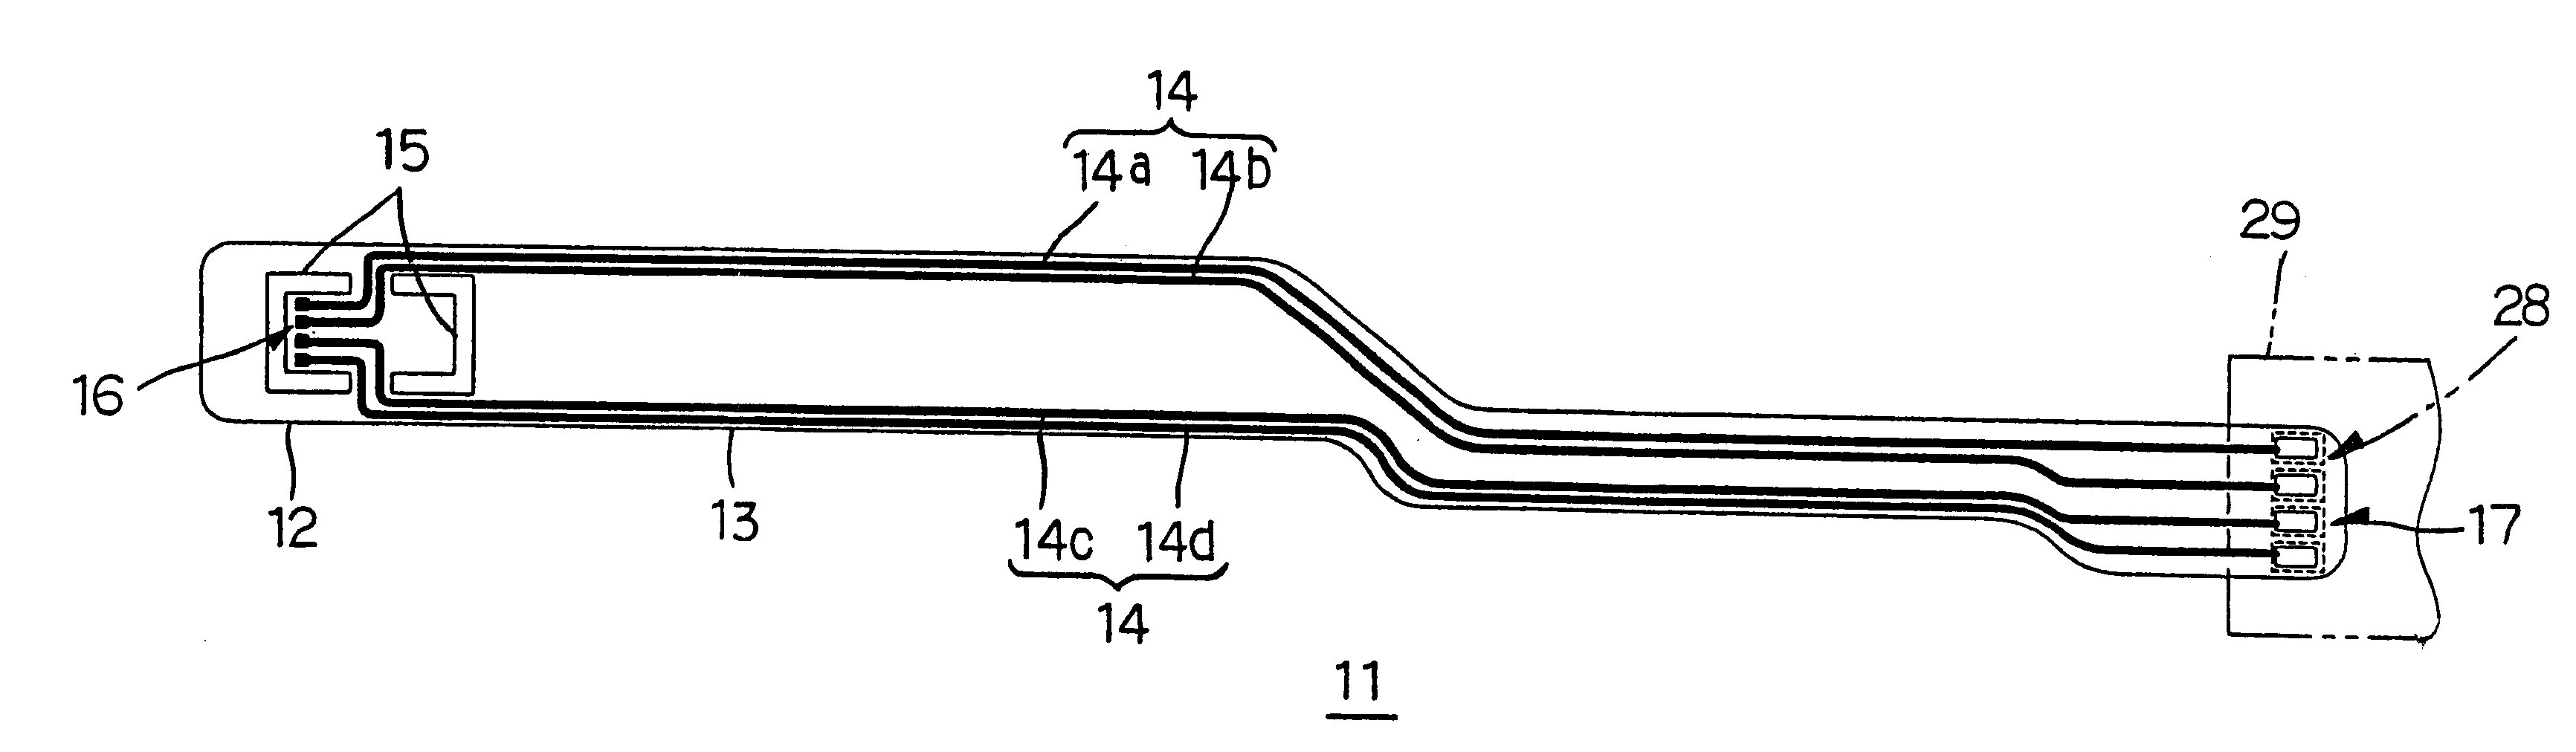 Suspension board with circuit